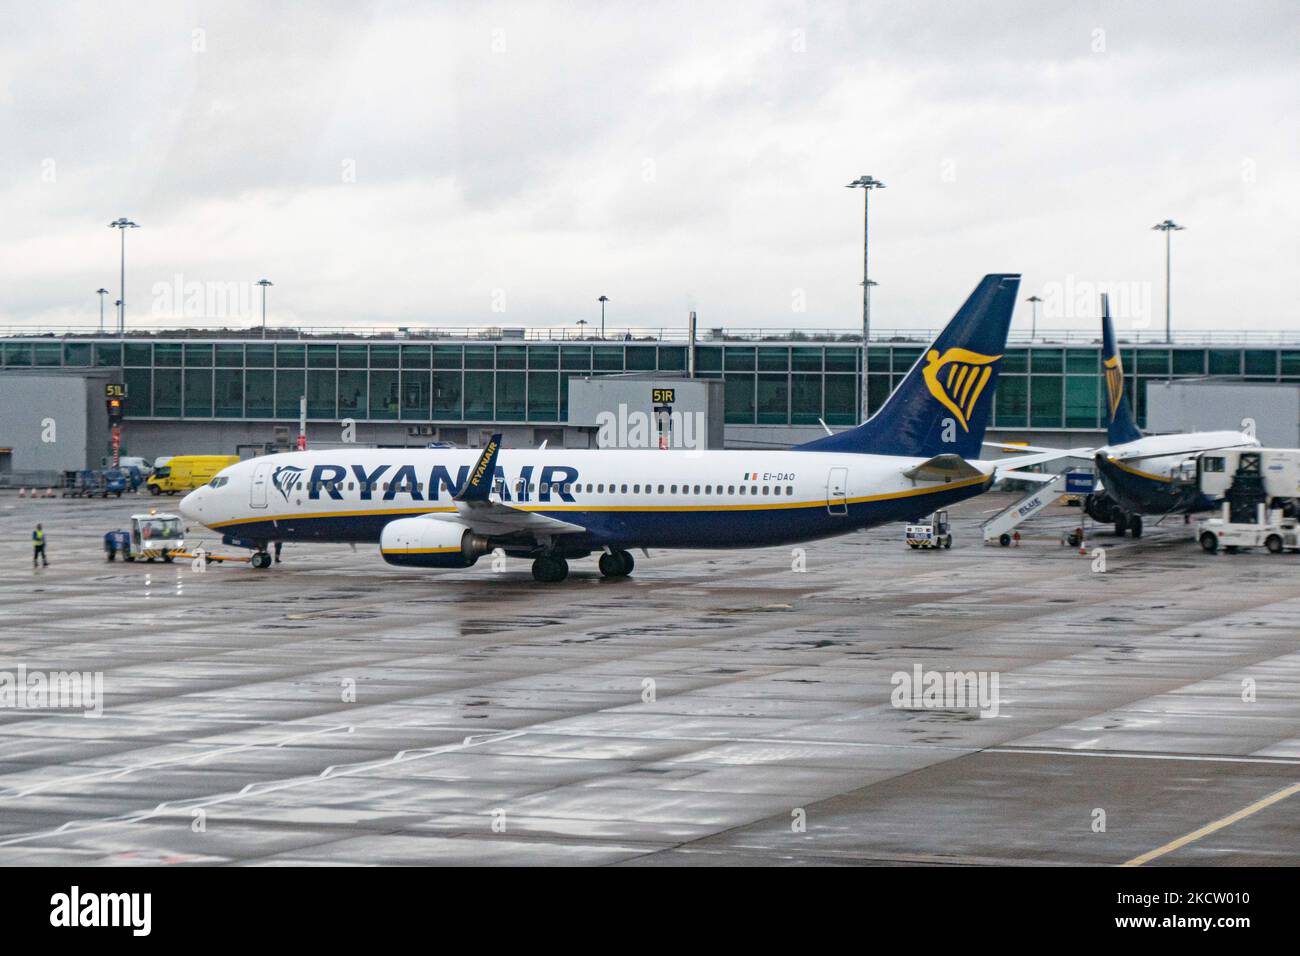 Boeing 737-800 passenger aircraft of the low-cost carrier Ryanair FR as seen at London Stansted Airport STN in front of the terminal and the gates. Ryanair Group operates a fleet with more than 400 Boeing 737-800 airplanes. The Irish budget airline uses Stansted as one of the primary operational bases. The world aviation industry is trying to recover from the negative impact of the Covid-19 Coronavirus pandemic. Stansted Airport, United Kingdom on November 12, 2021. (Photo by Nicolas Economou/NurPhoto) Stock Photo